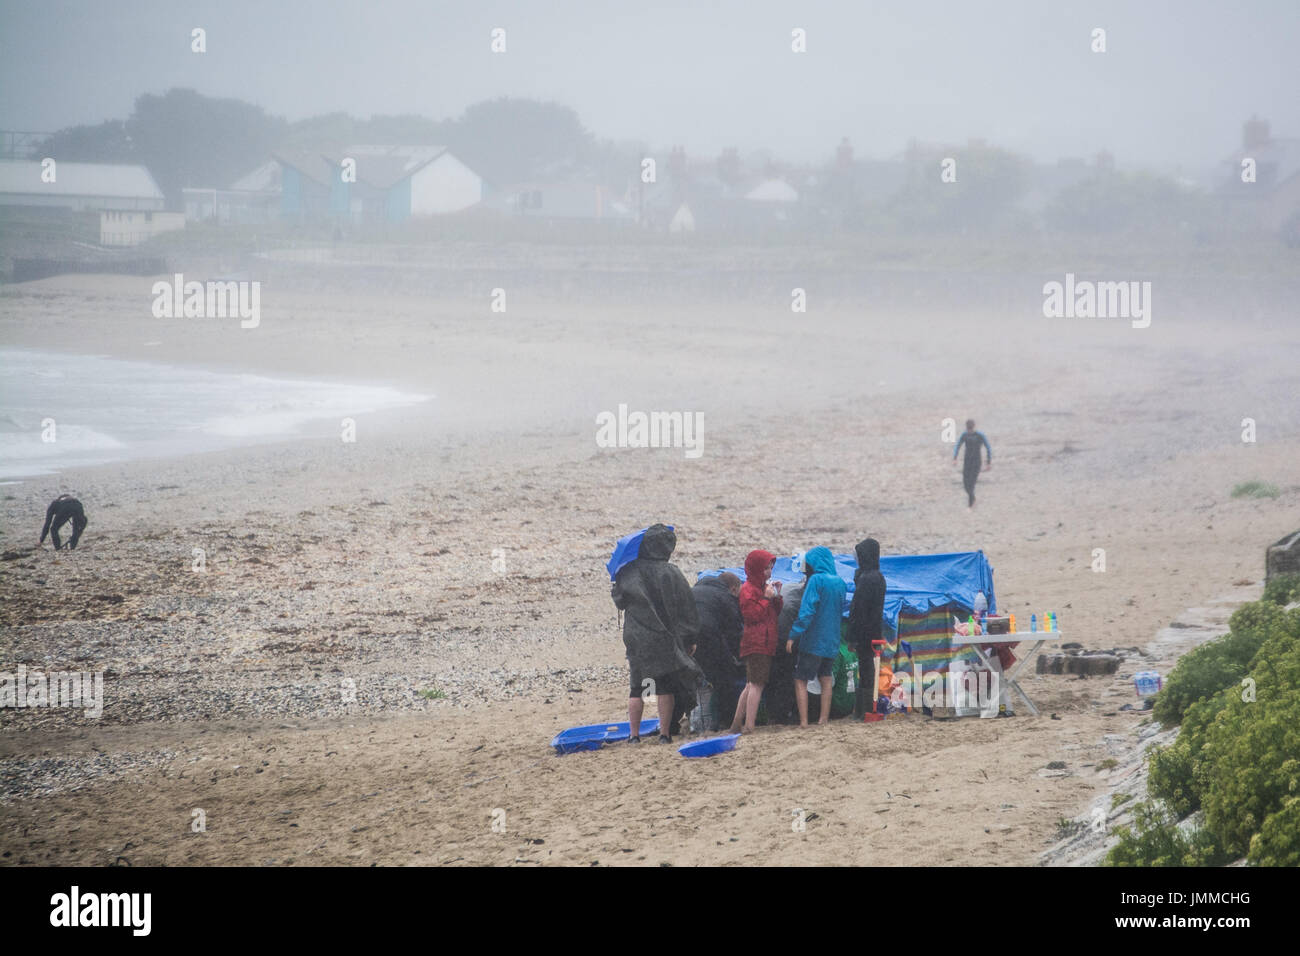 Marazion, Cornwall, UK. 28th July 2017. UK Weather. It was a wet and windy day at Marazion today. This family were determined to make the most of their holiday to Cornwall, even if that meant having the picnic on the beach, in the rain. Credit: cwallpix/Alamy Live News Stock Photo